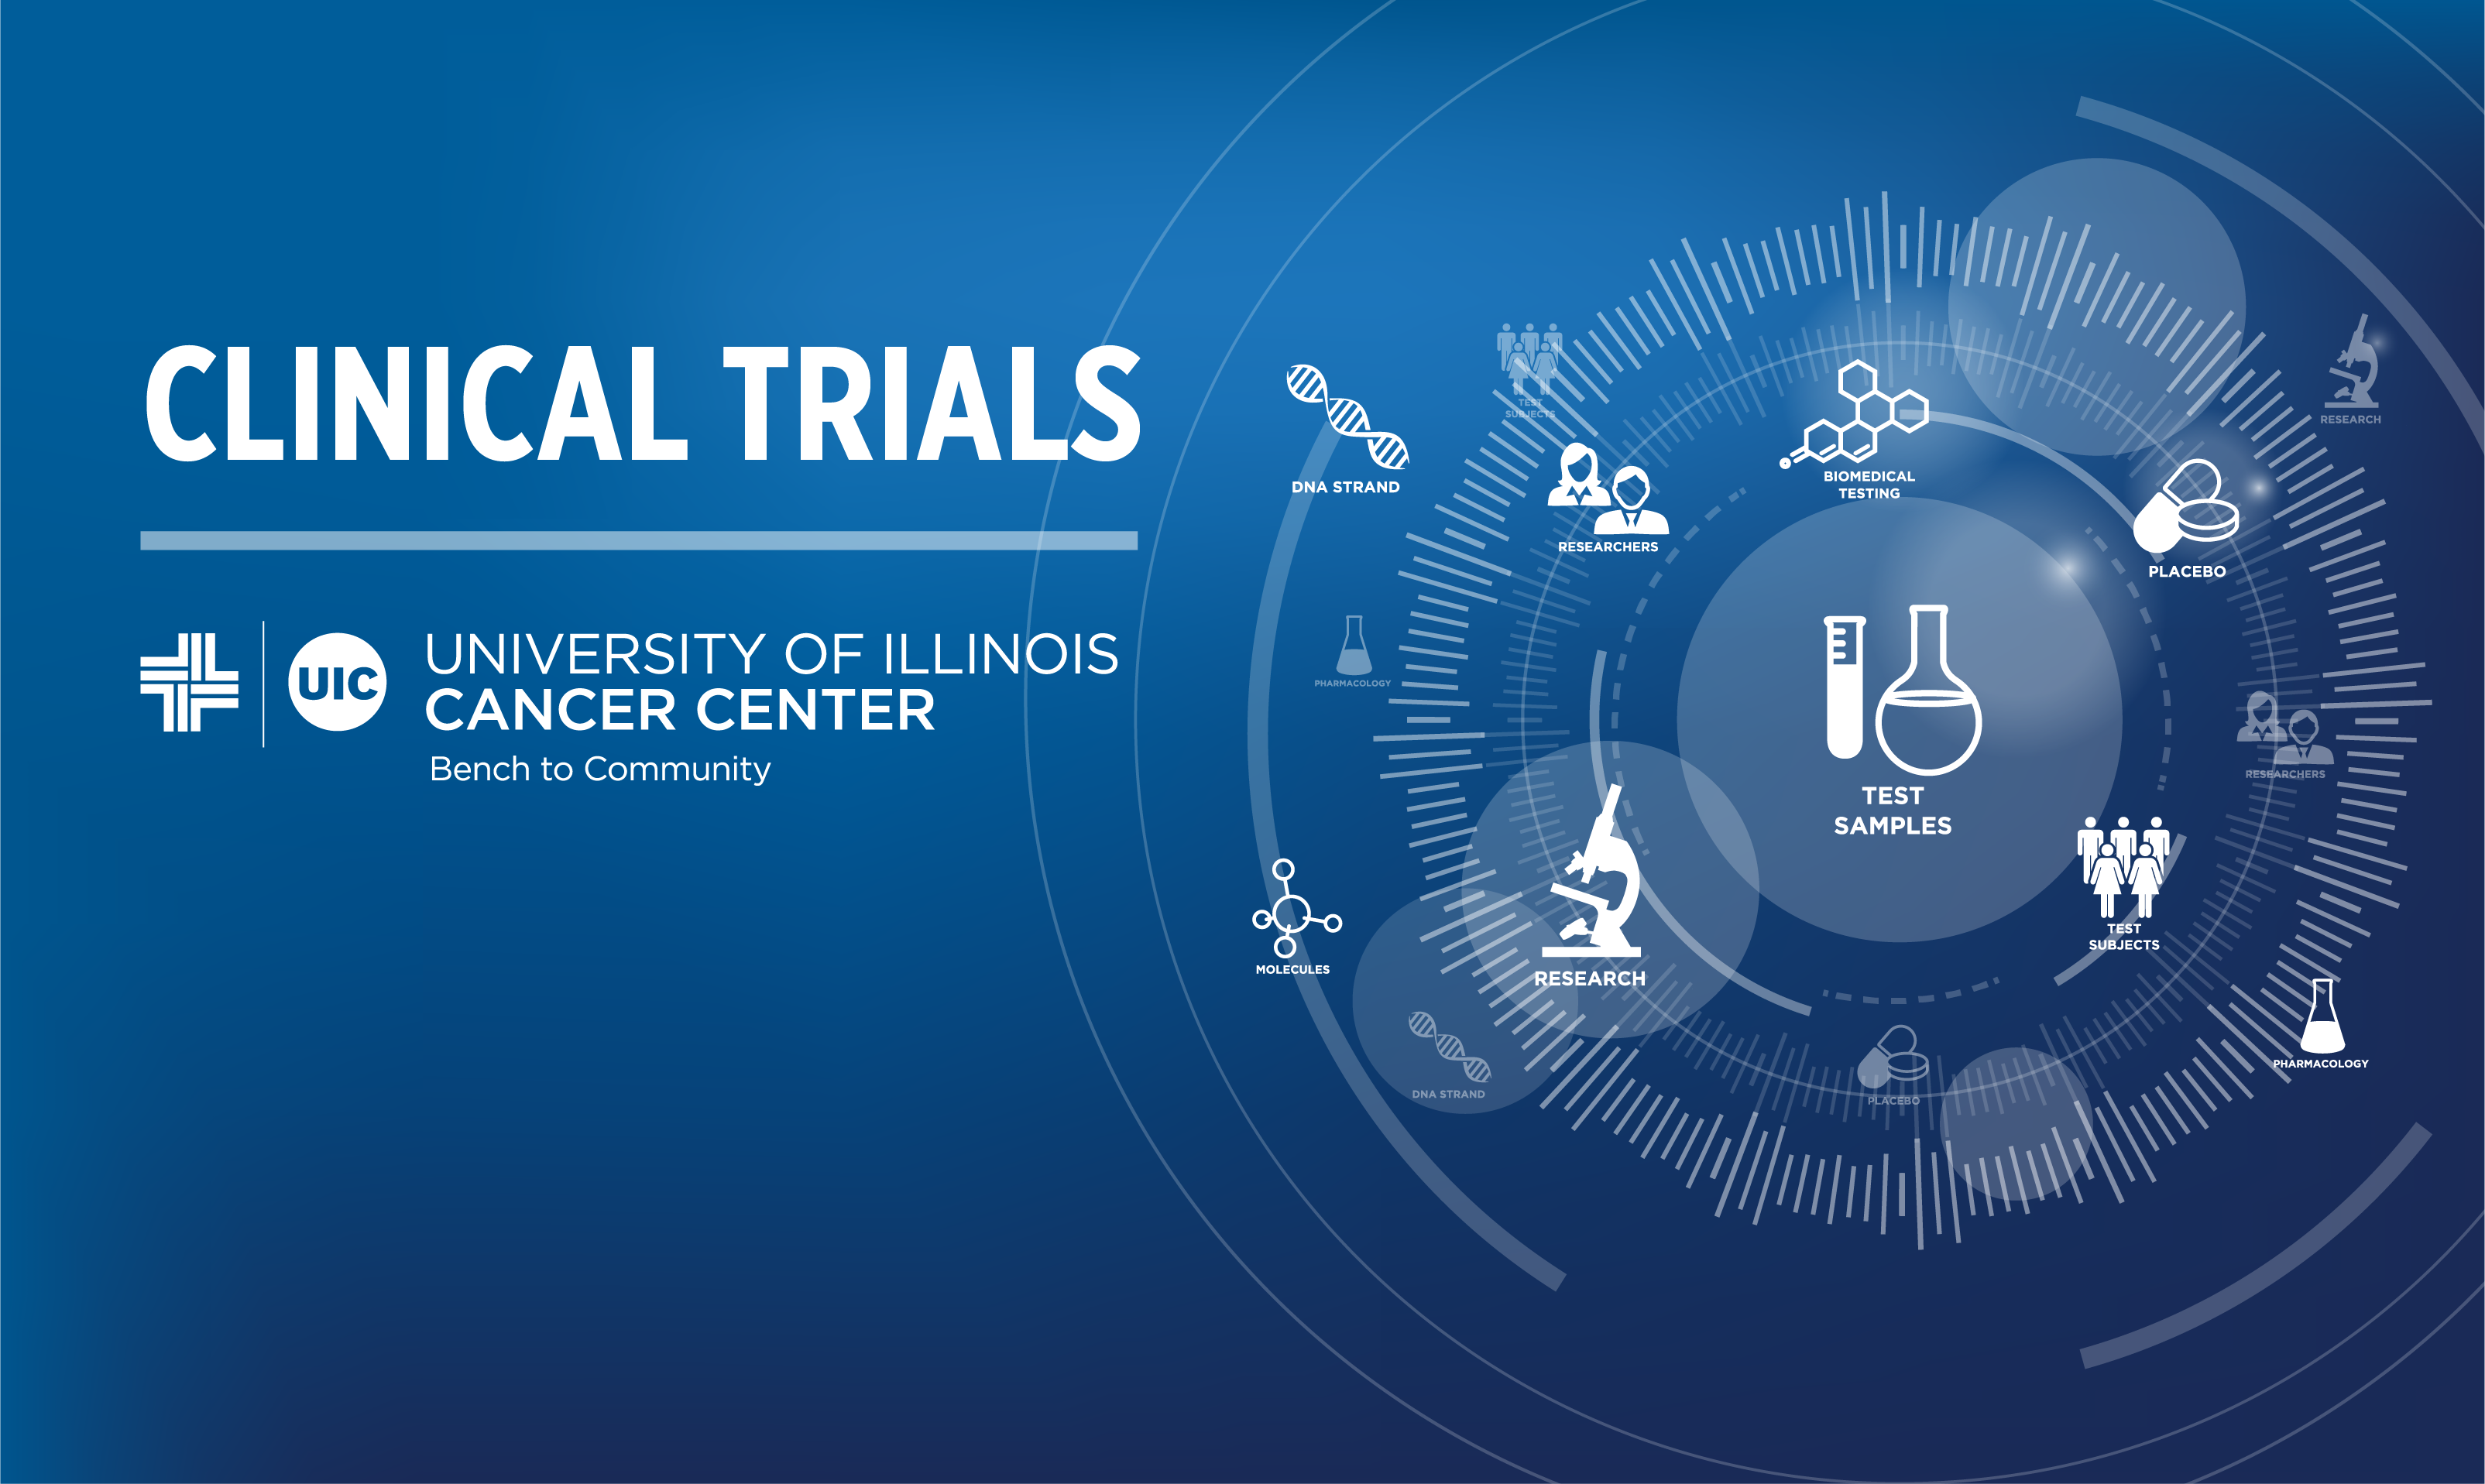 Clinical Trials- UIC University of Illinois Cancer Center Bench to Community.